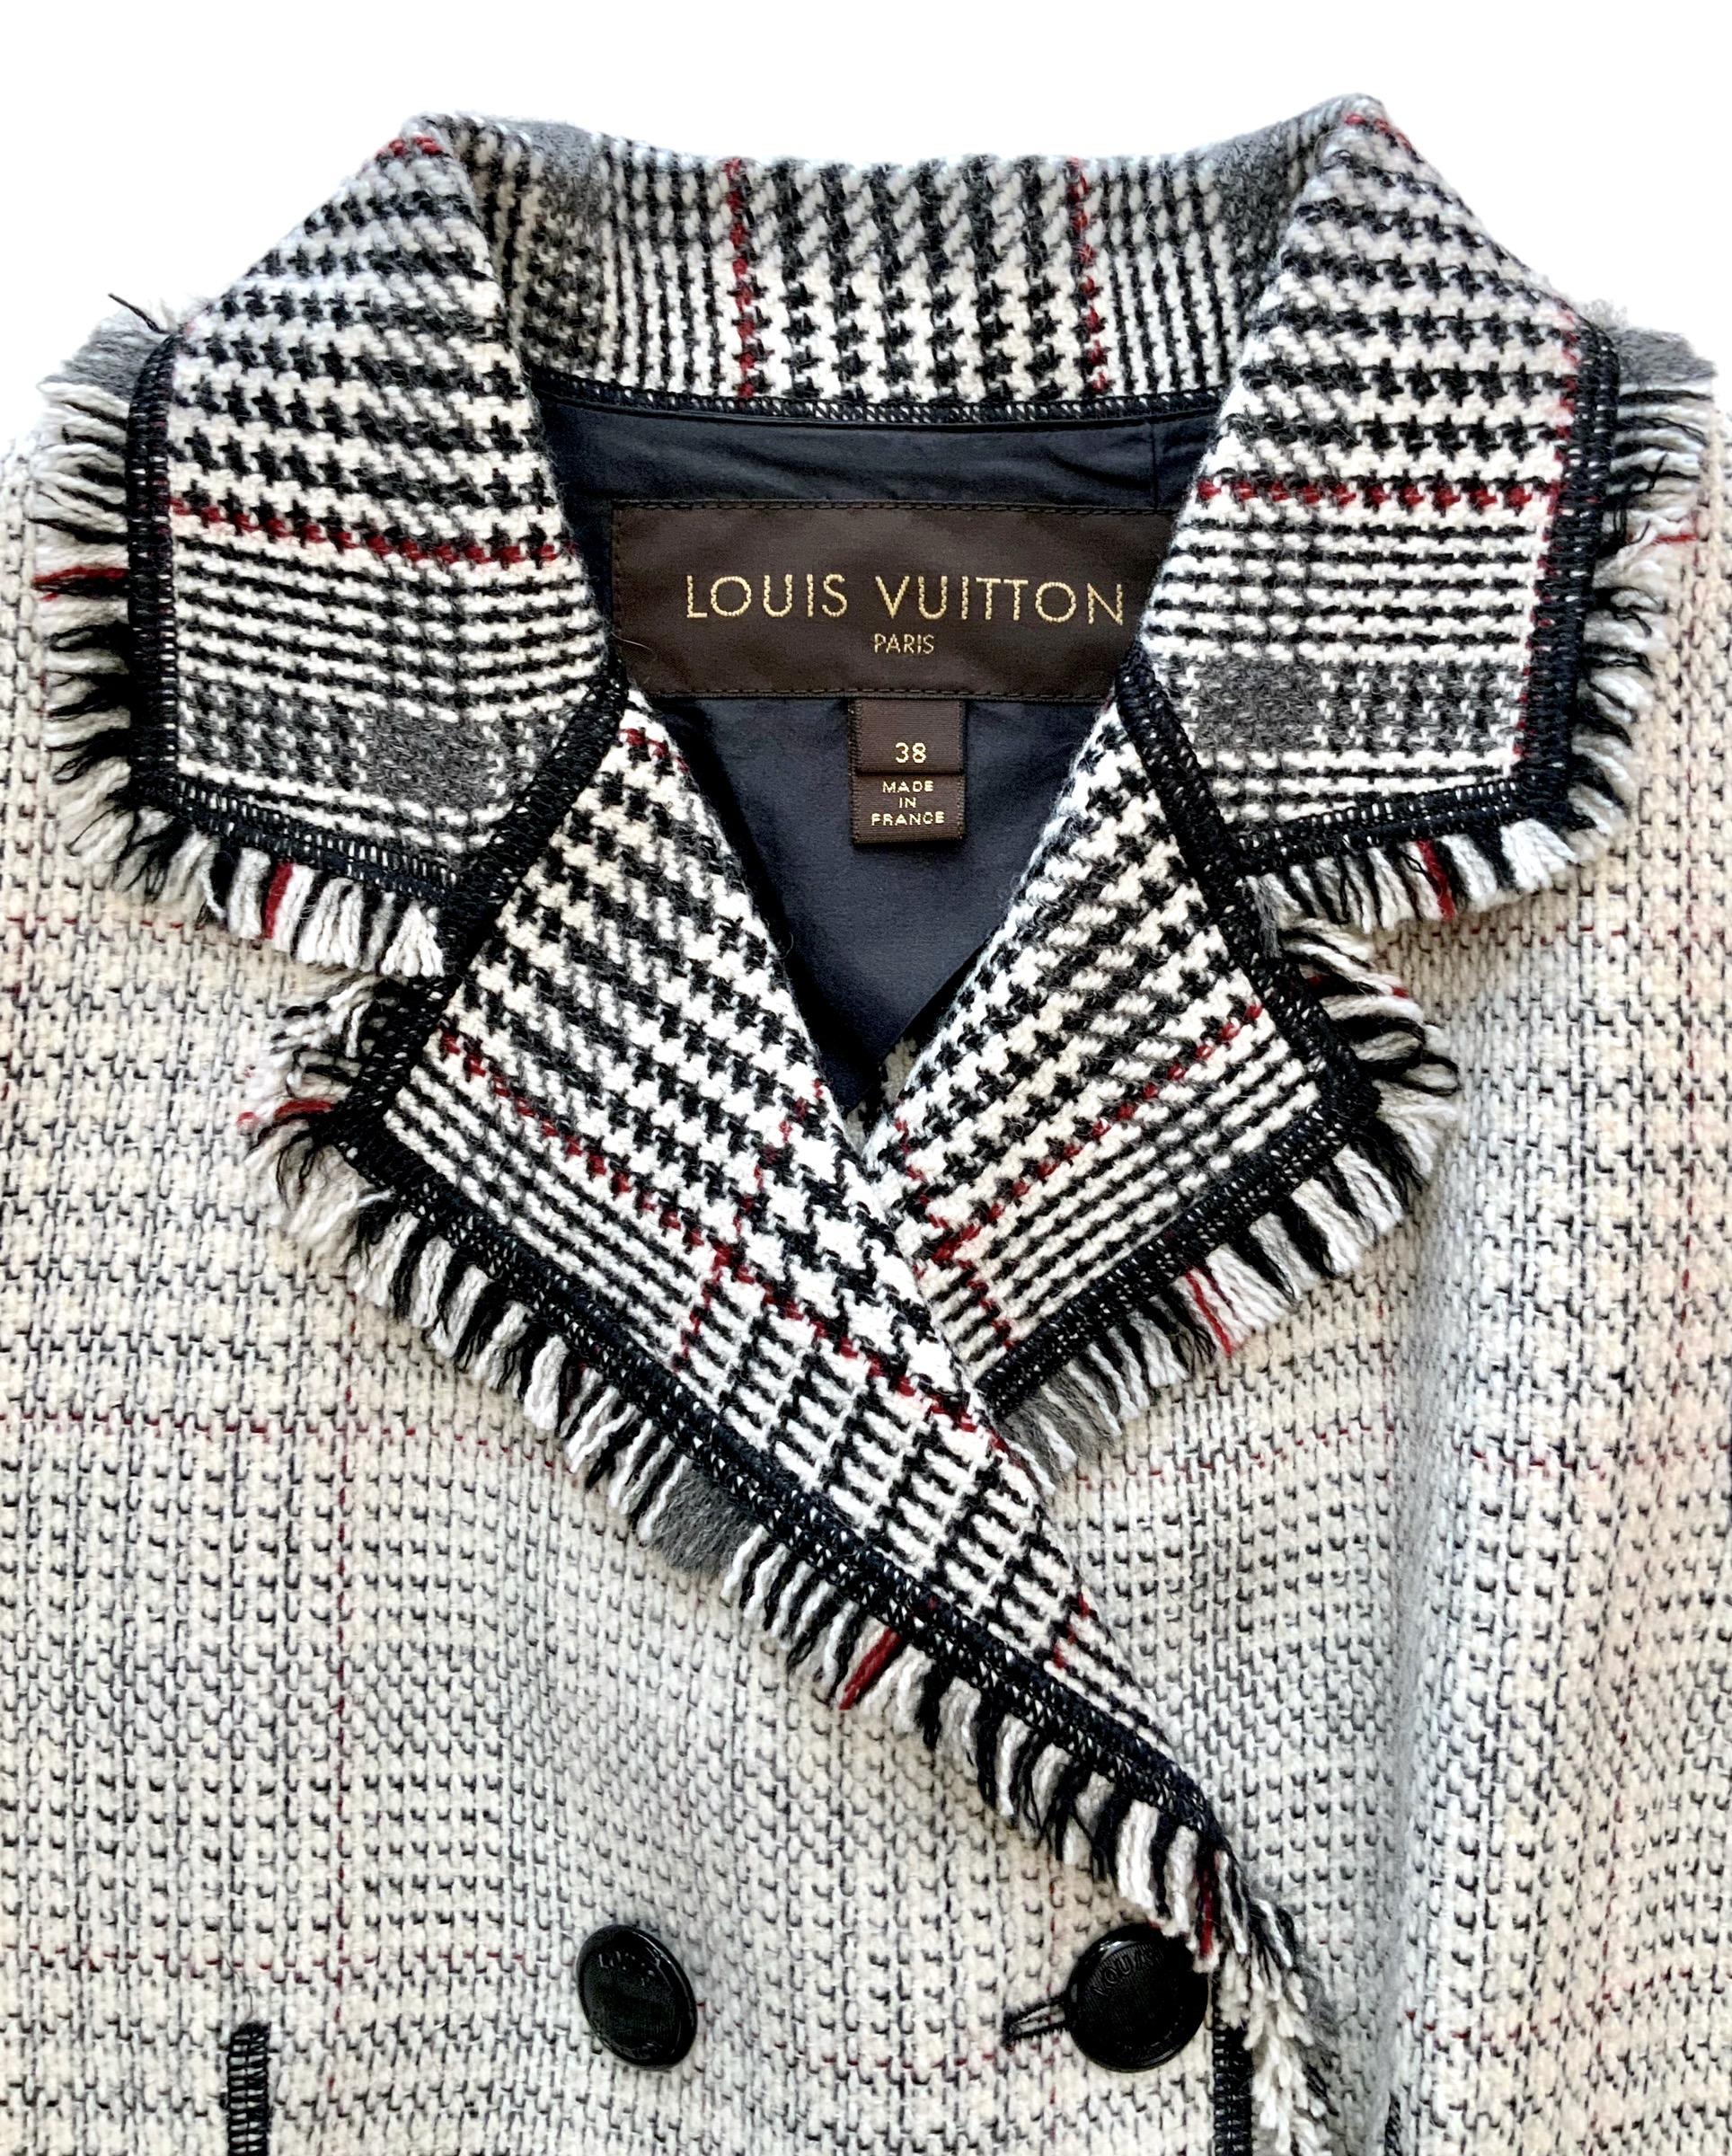 Very interesting jacket from the house of Louis Vuitton.
Crafted in a single layer of a light weight wool with a Prince of Wales check pattern in a light cream tones on the outside and black, burgundy and grey tones on the inside.
The collar and